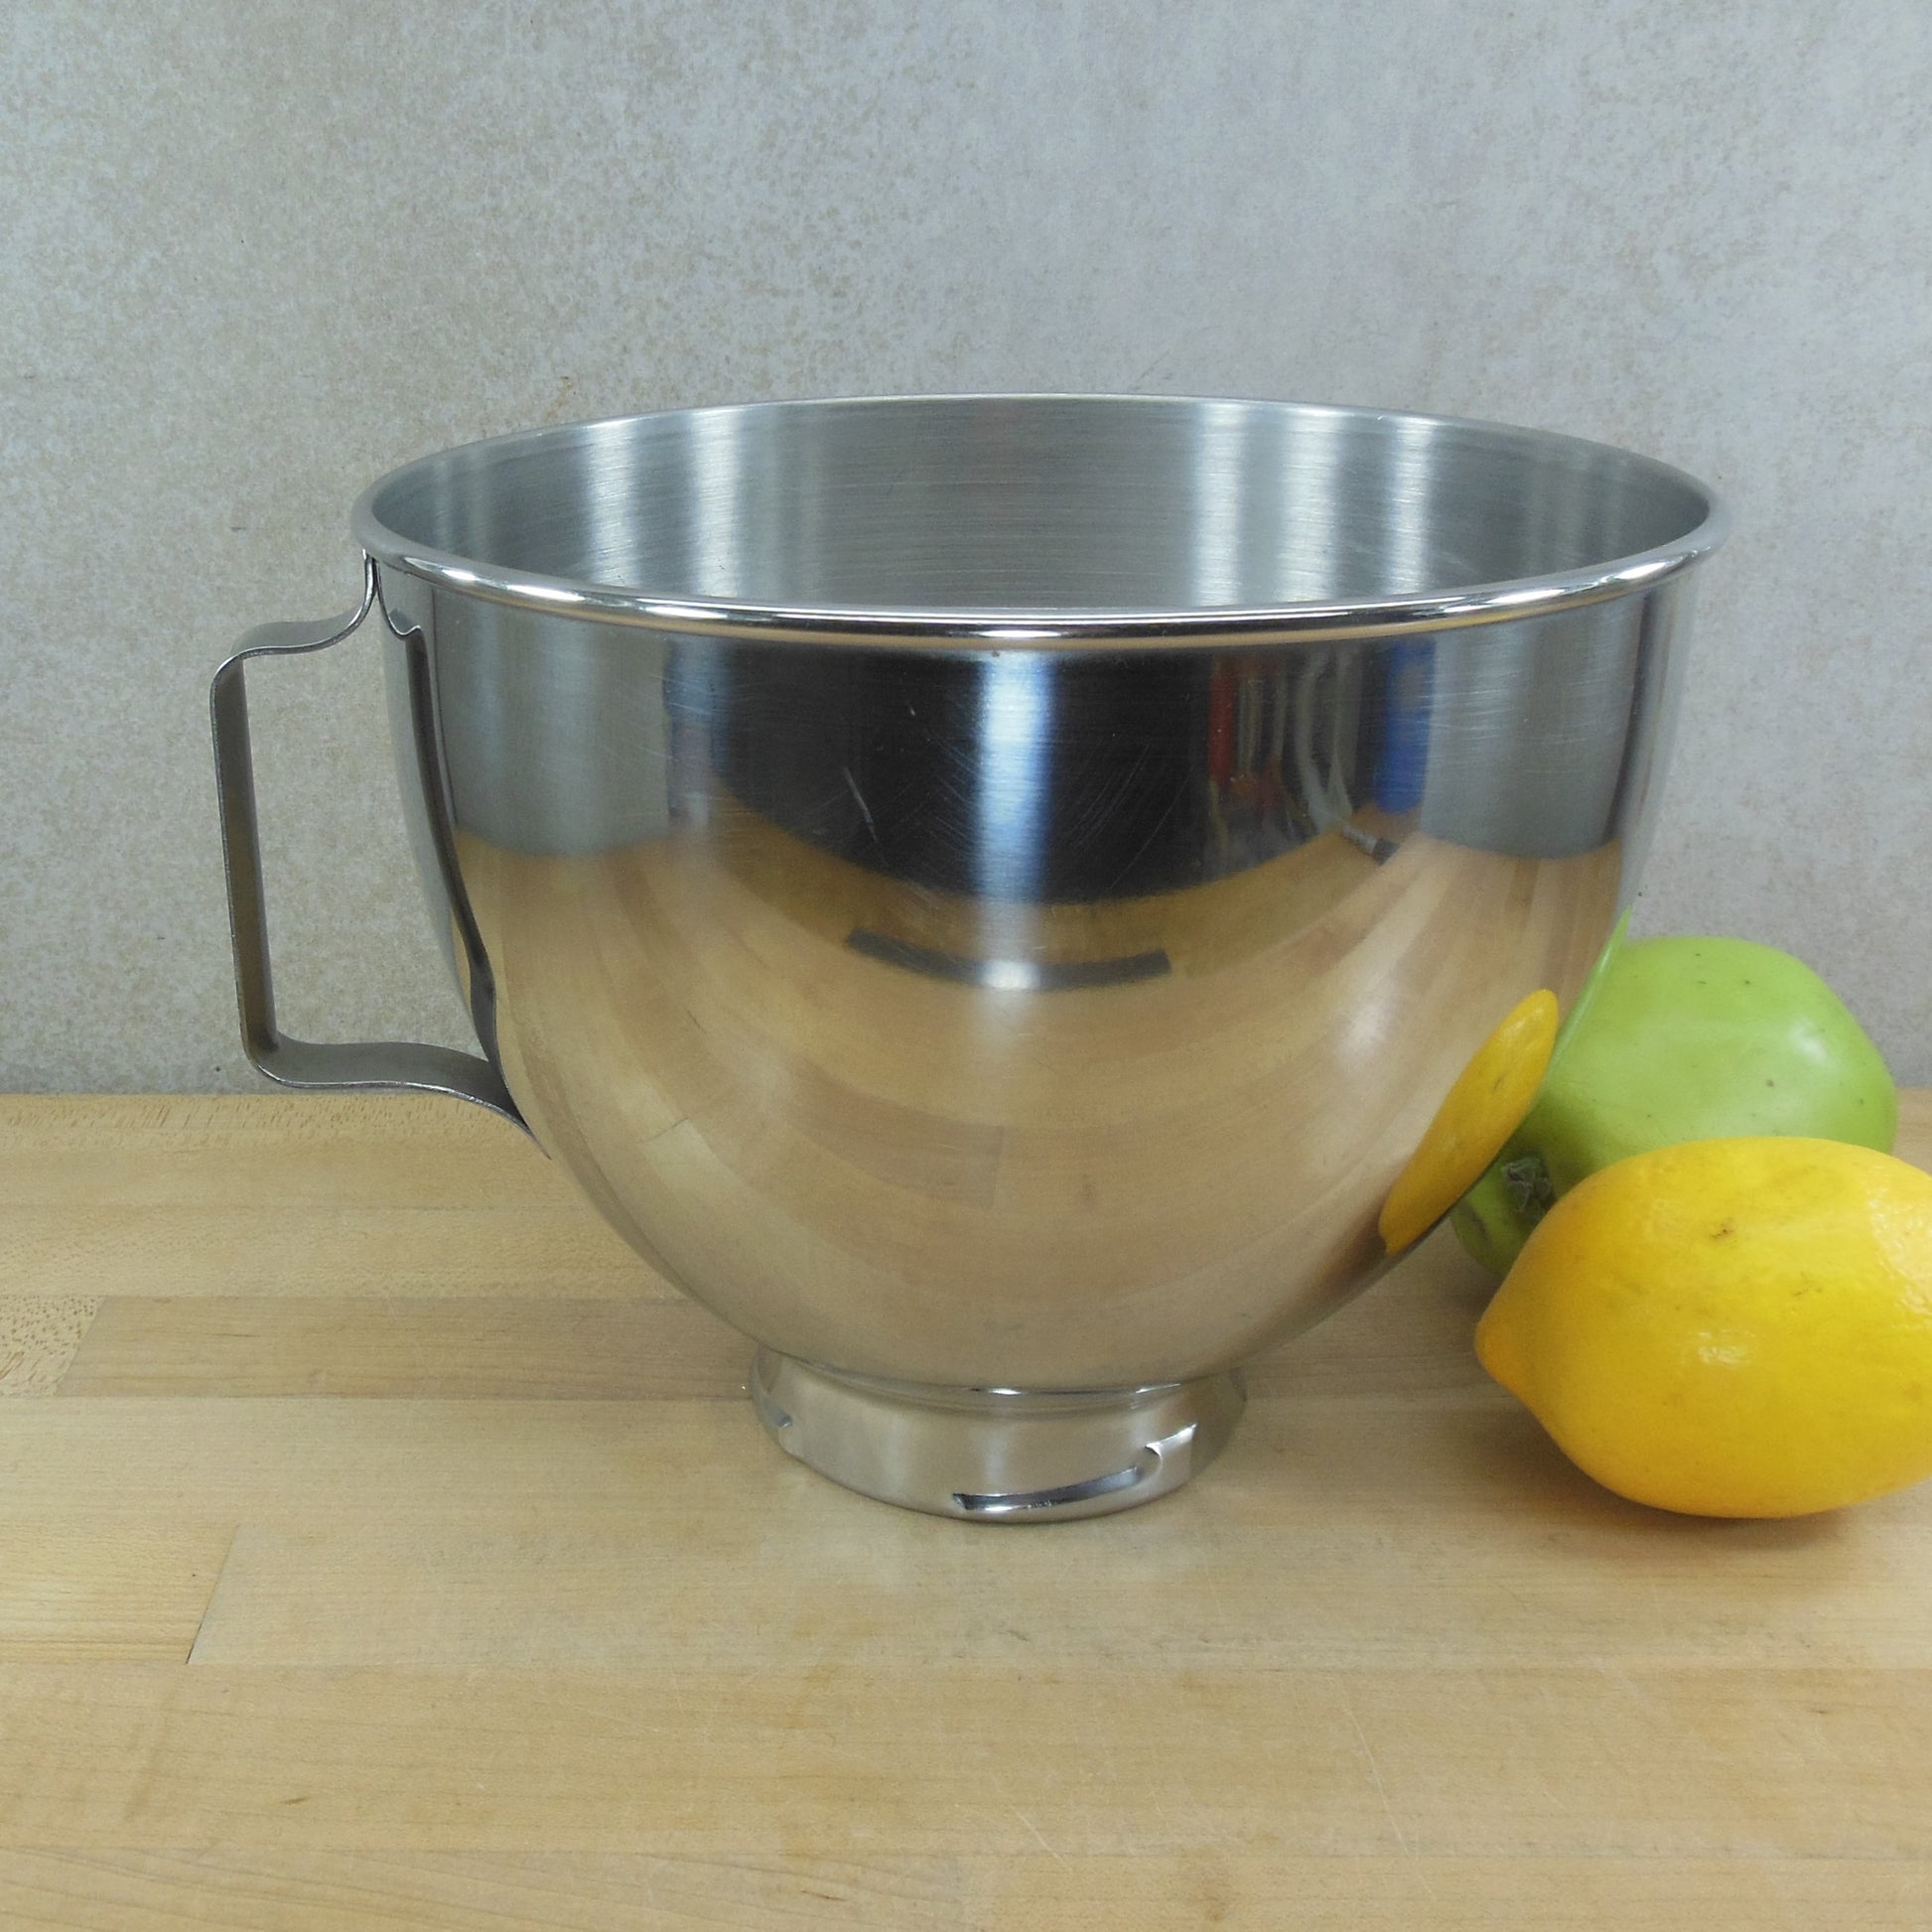 KitchenAid 4.5-Quart Stainless Steel Mixing Bowl in the Stand